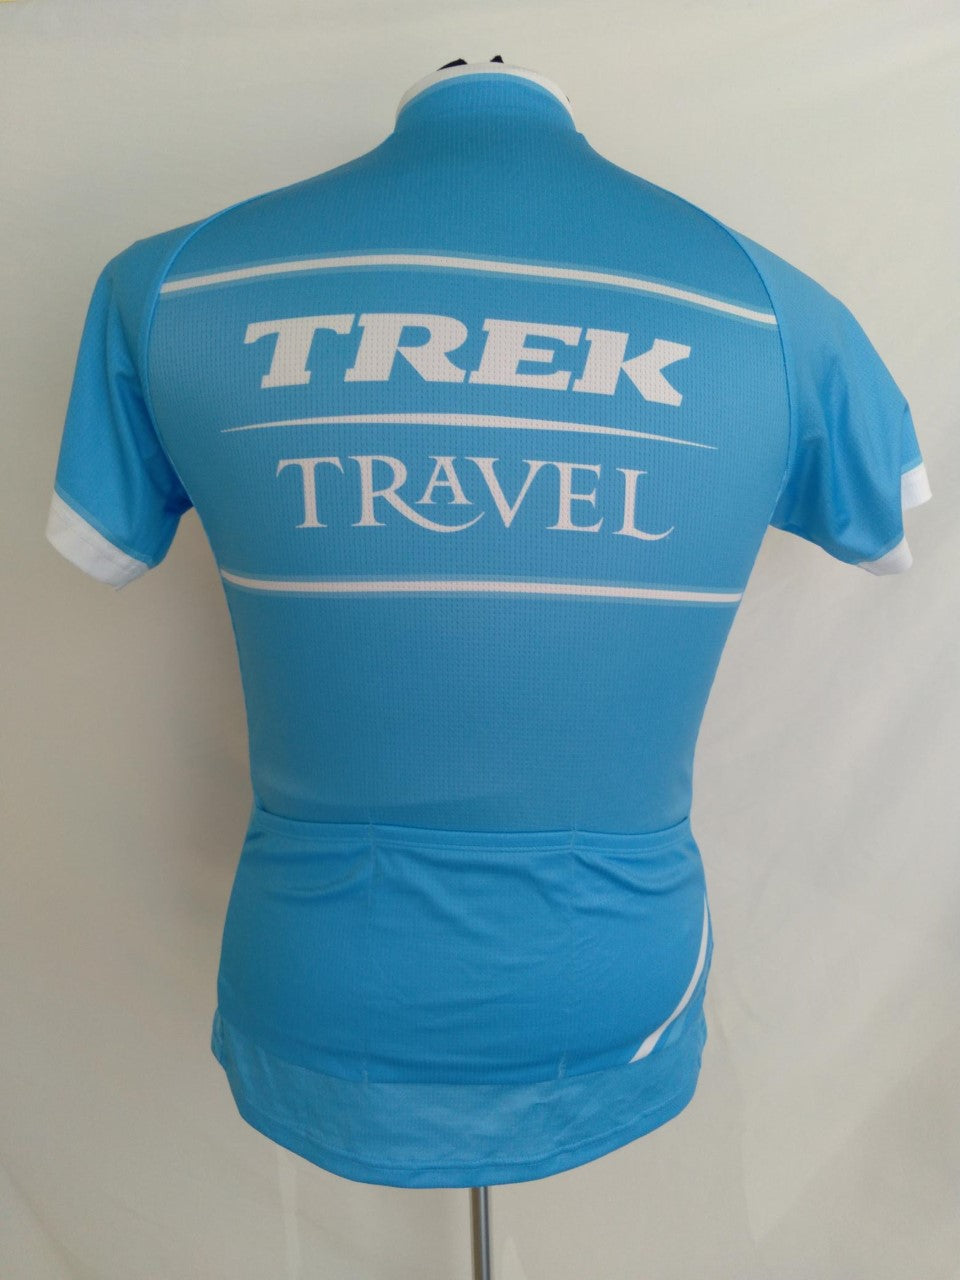 Trek by Bontrager Travel Cycle Jersey Top -- M